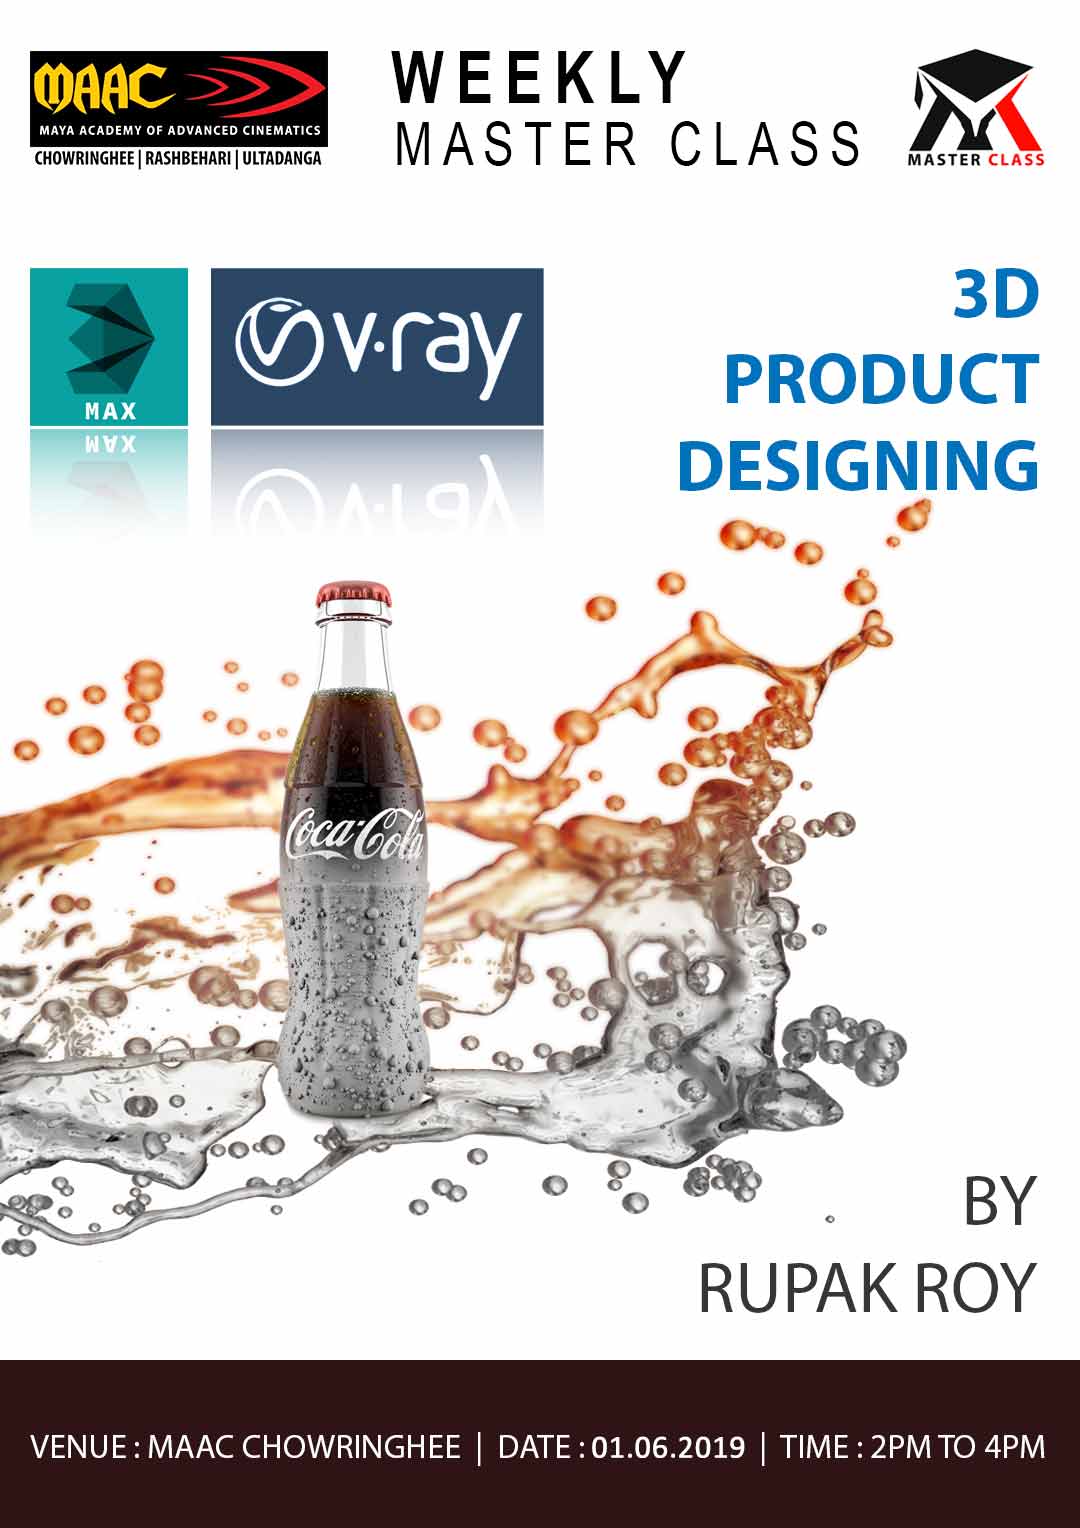 Weekly Master Class on 3D Product Designing